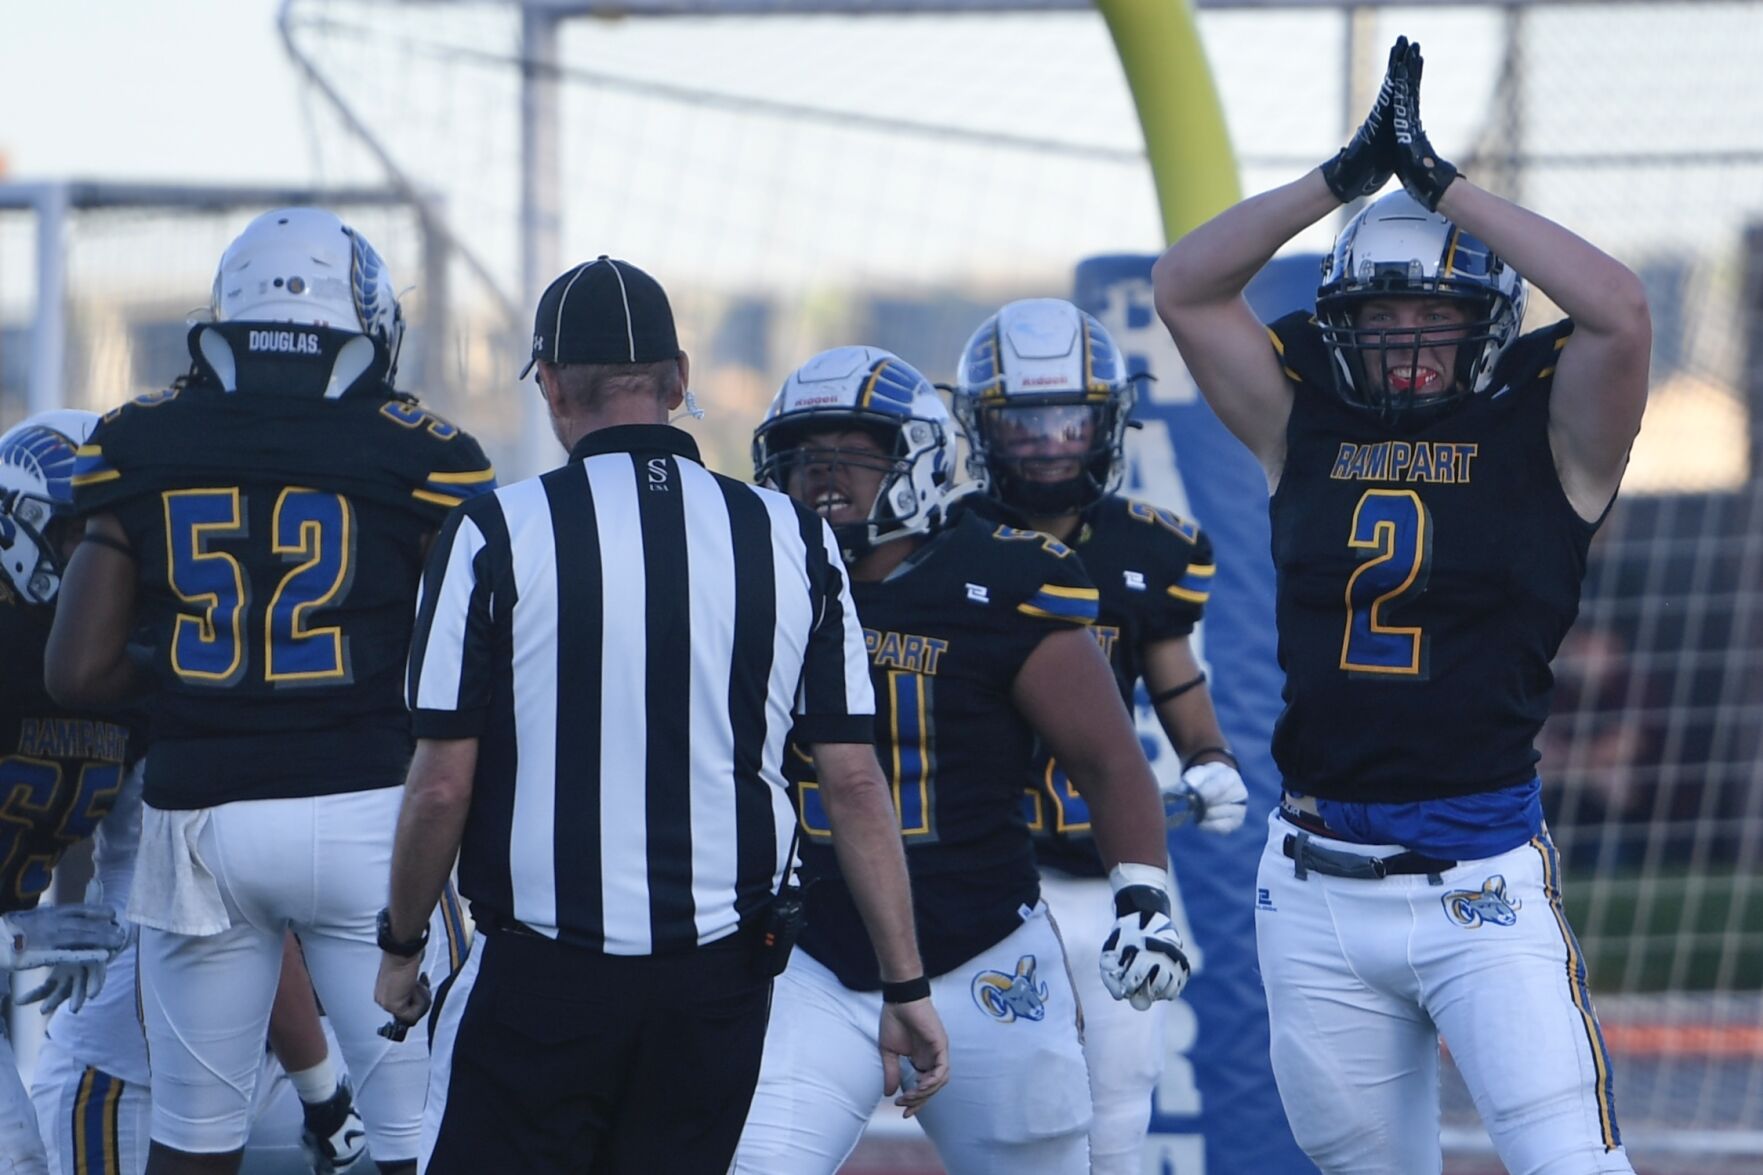 Rampart Rallies from Early Deficit to Stay Undefeated with 28-18 Victory over Doherty